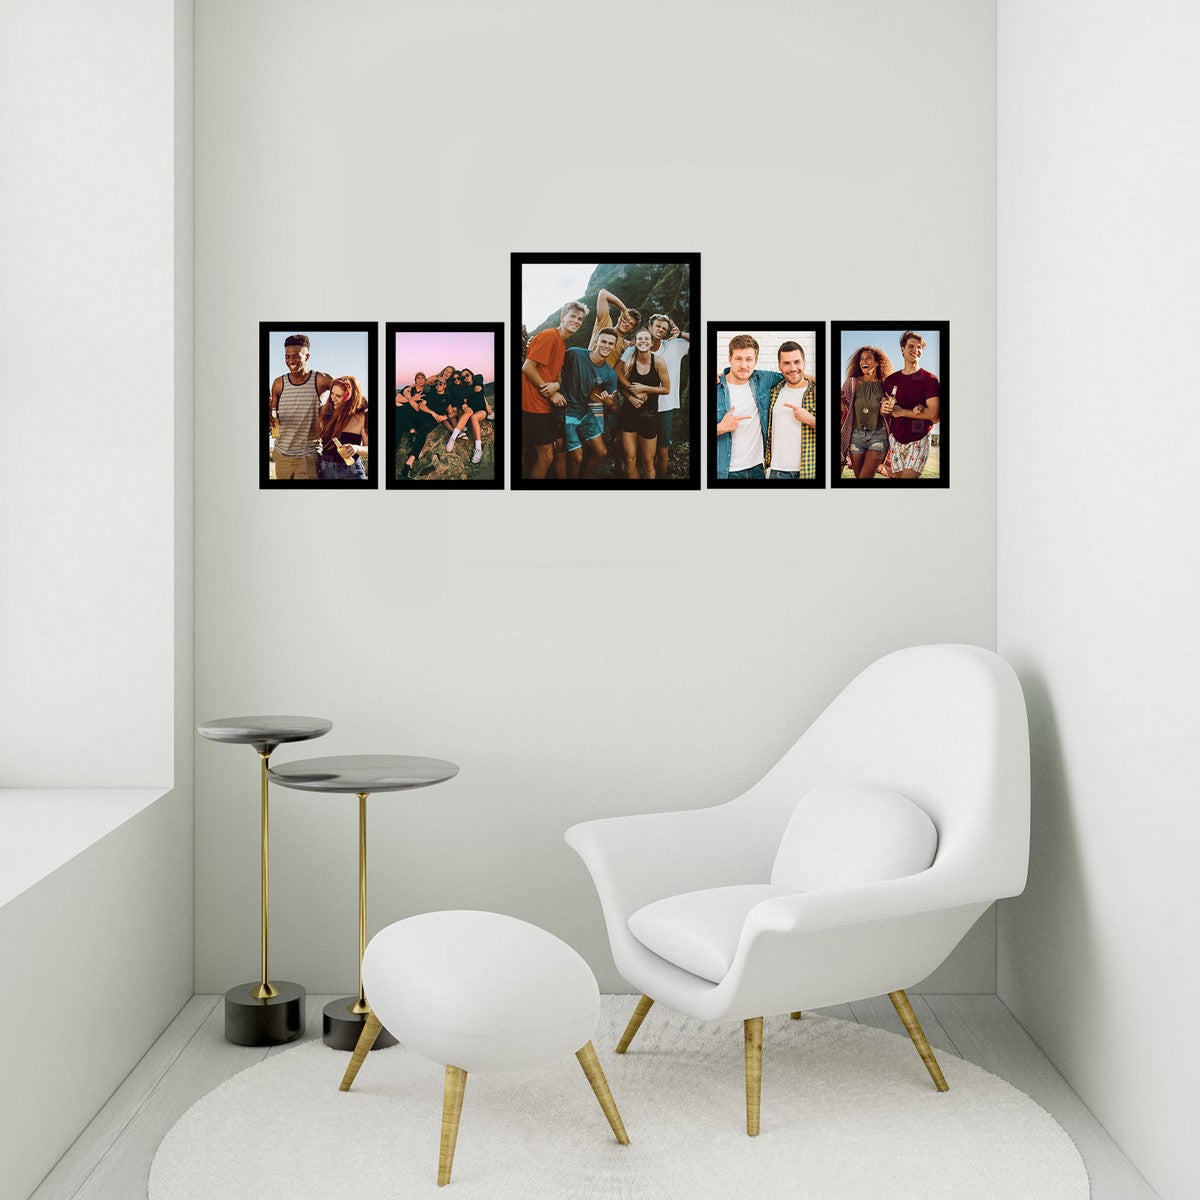 Memory Wall Collage Photo Frame - Set of 5 Photo Frames for 4 Photos of 5"x7", 1 Photos of 8"x10" 2